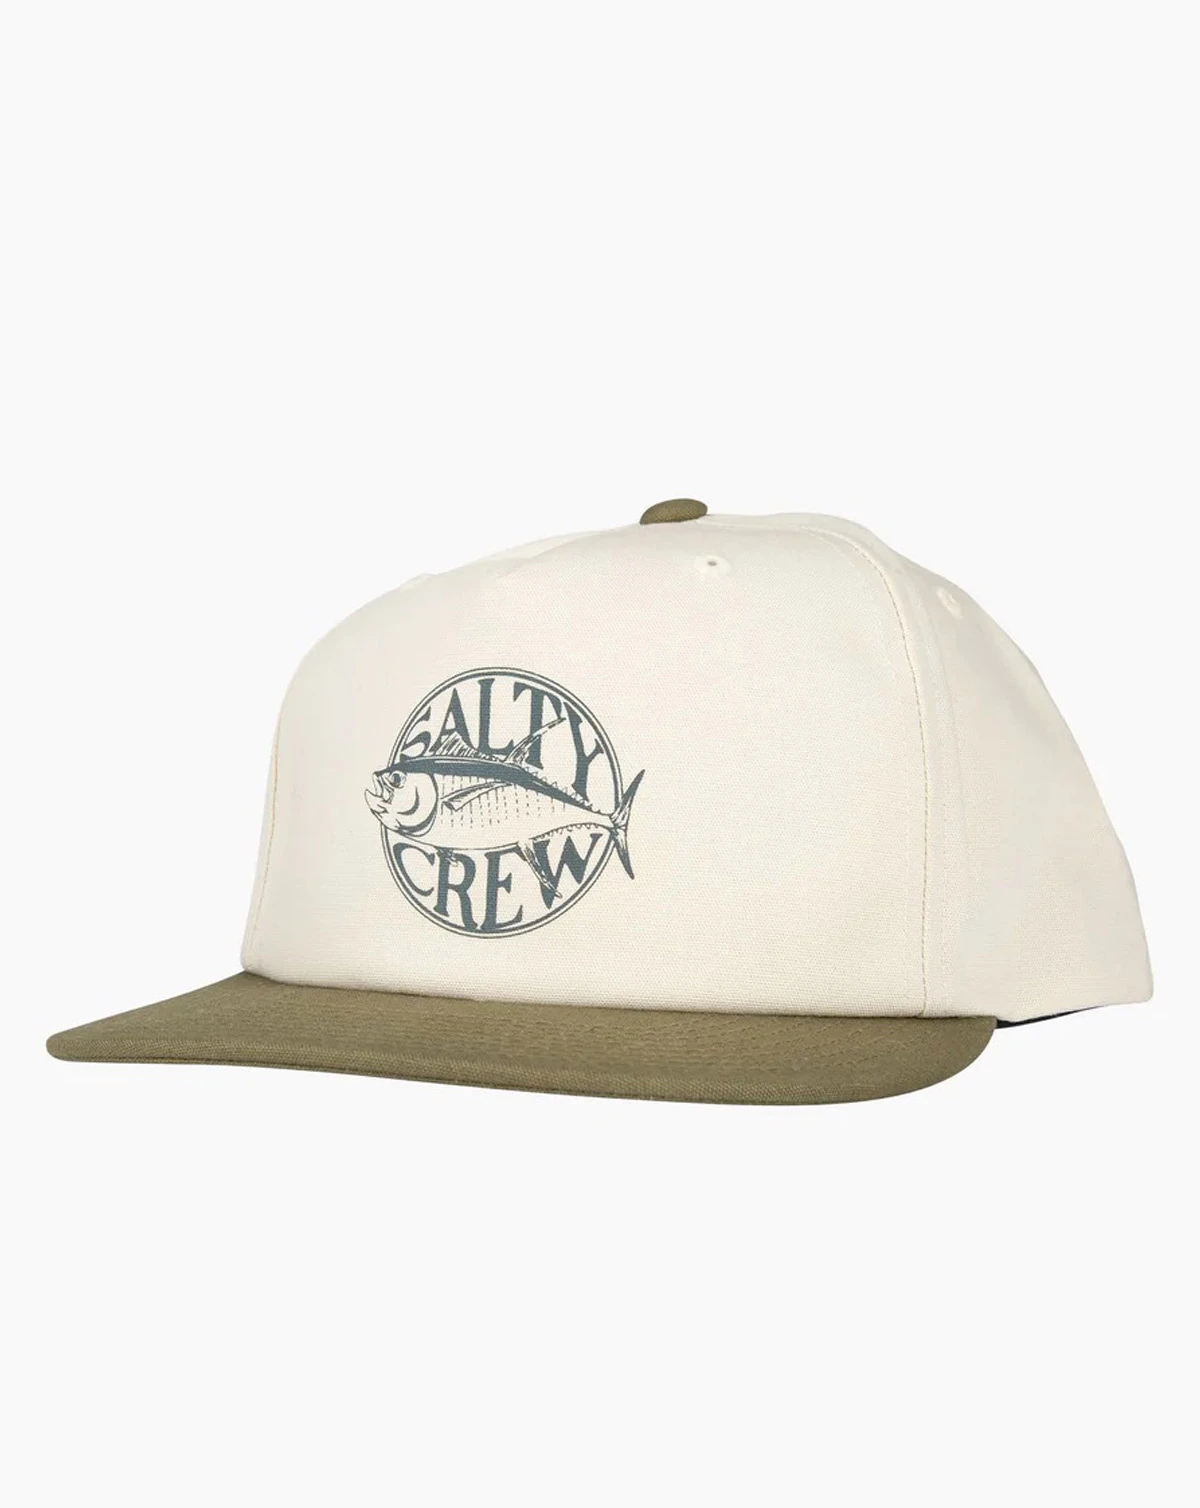 Army caps online – caps military Army Buy Army & Star 